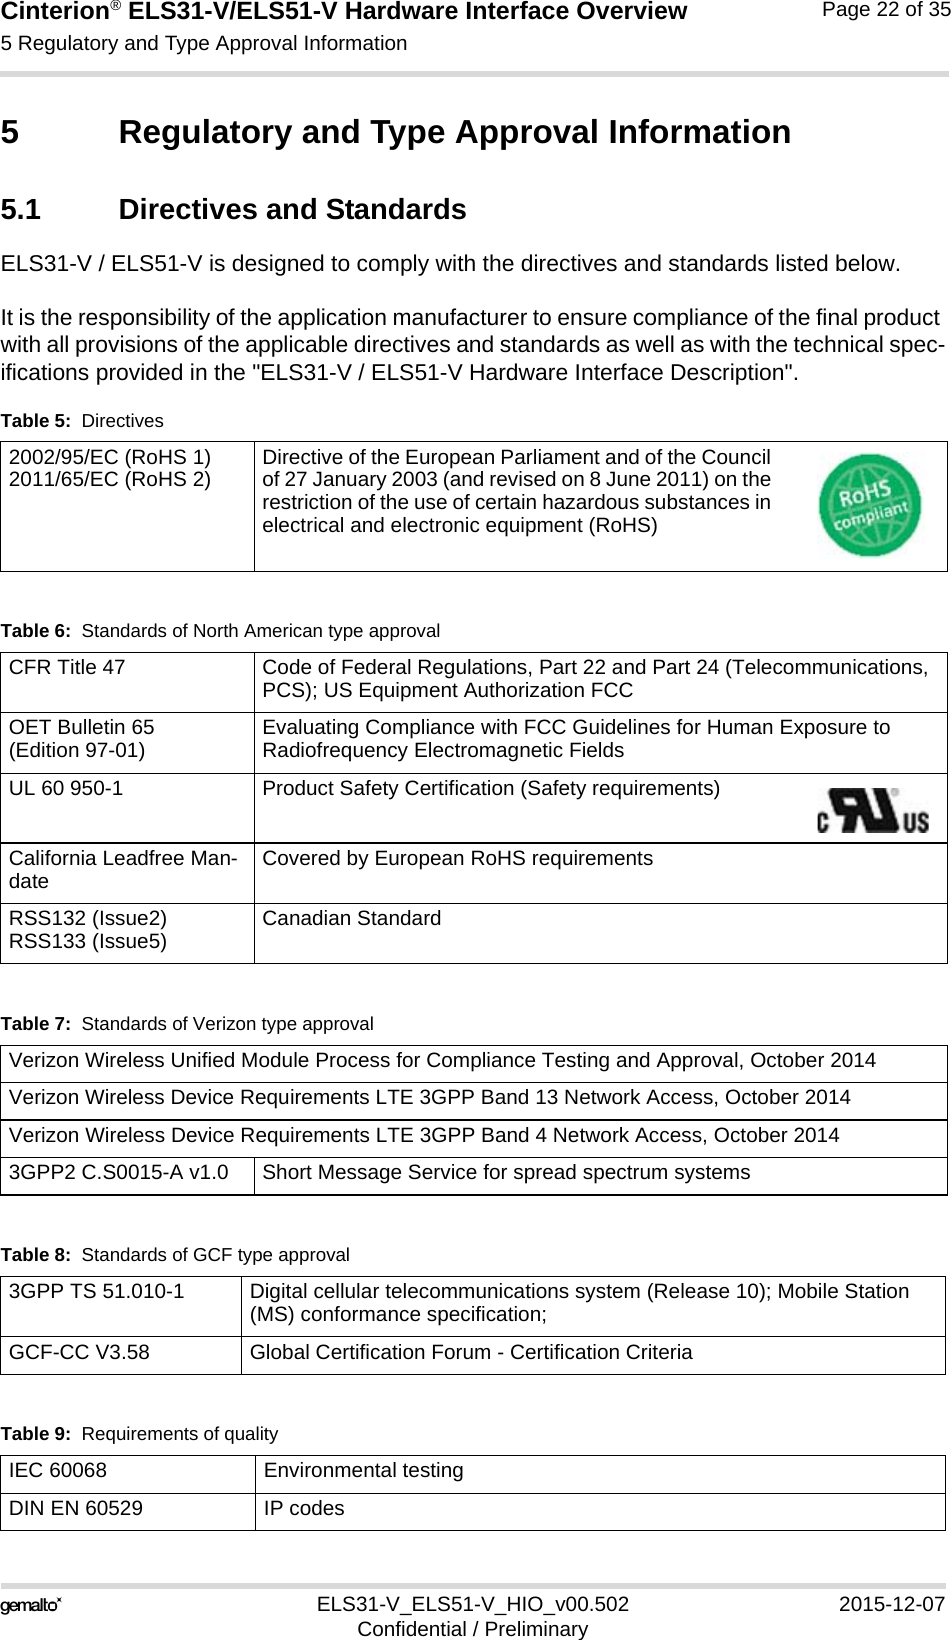 Cinterion® ELS31-V/ELS51-V Hardware Interface Overview5 Regulatory and Type Approval Information27ELS31-V_ELS51-V_HIO_v00.502 2015-12-07Confidential / PreliminaryPage 22 of 355 Regulatory and Type Approval Information5.1 Directives and StandardsELS31-V / ELS51-V is designed to comply with the directives and standards listed below.It is the responsibility of the application manufacturer to ensure compliance of the final product with all provisions of the applicable directives and standards as well as with the technical spec-ifications provided in the &quot;ELS31-V / ELS51-V Hardware Interface Description&quot;.Table 5:  Directives2002/95/EC (RoHS 1)2011/65/EC (RoHS 2) Directive of the European Parliament and of the Council of 27 January 2003 (and revised on 8 June 2011) on the restriction of the use of certain hazardous substances in electrical and electronic equipment (RoHS)Table 6:  Standards of North American type approvalCFR Title 47 Code of Federal Regulations, Part 22 and Part 24 (Telecommunications, PCS); US Equipment Authorization FCCOET Bulletin 65 (Edition 97-01)  Evaluating Compliance with FCC Guidelines for Human Exposure to Radiofrequency Electromagnetic FieldsUL 60 950-1 Product Safety Certification (Safety requirements)California Leadfree Man-date Covered by European RoHS requirementsRSS132 (Issue2)RSS133 (Issue5) Canadian StandardTable 7:  Standards of Verizon type approvalVerizon Wireless Unified Module Process for Compliance Testing and Approval, October 2014Verizon Wireless Device Requirements LTE 3GPP Band 13 Network Access, October 2014Verizon Wireless Device Requirements LTE 3GPP Band 4 Network Access, October 20143GPP2 C.S0015-A v1.0  Short Message Service for spread spectrum systemsTable 8:  Standards of GCF type approval3GPP TS 51.010-1 Digital cellular telecommunications system (Release 10); Mobile Station (MS) conformance specification;GCF-CC V3.58  Global Certification Forum - Certification CriteriaTable 9:  Requirements of qualityIEC 60068 Environmental testingDIN EN 60529 IP codes